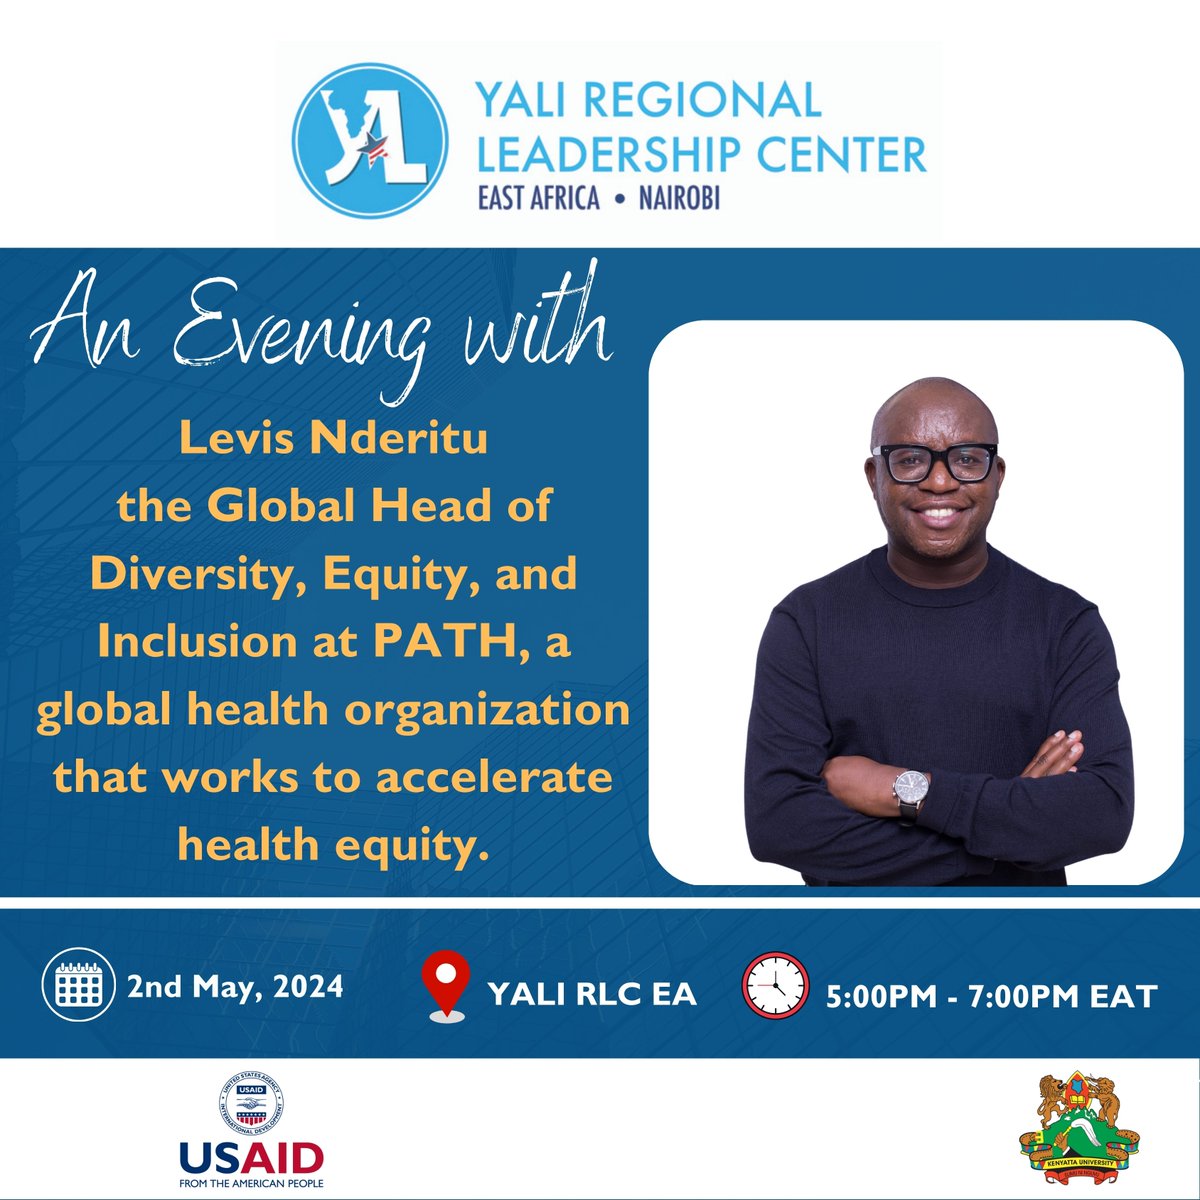 Happening today from 5:00PM @YALIRCLEA, #Cohort 55 Evening with Lewis Nderitu Head of Diversity, Equity and Inclusion at PATH Global.